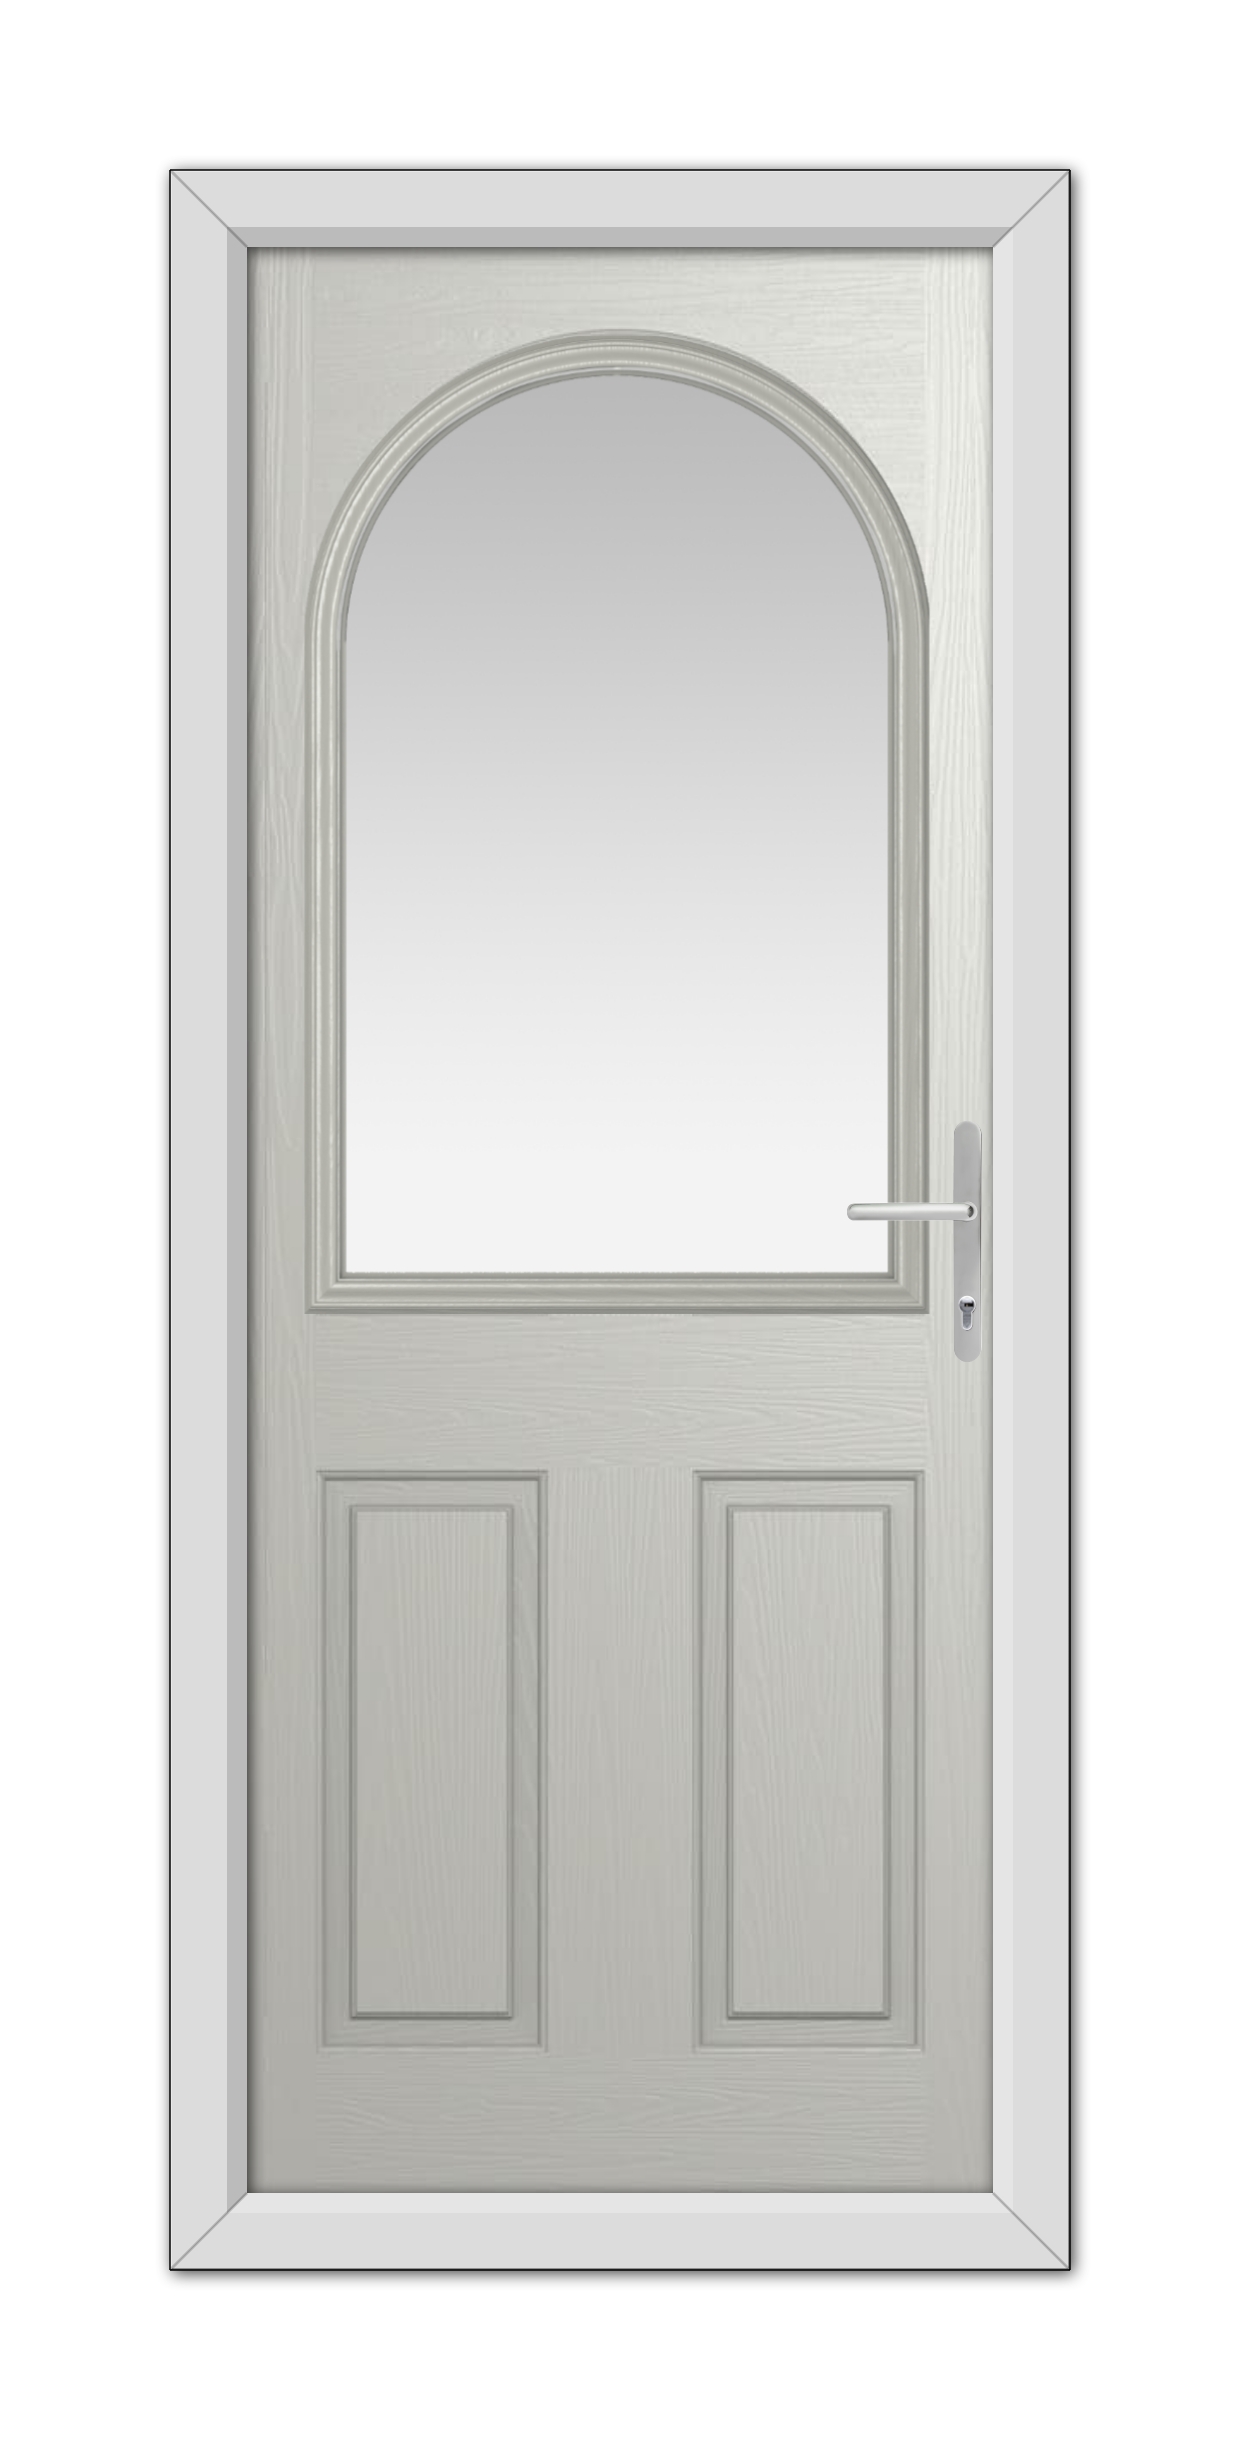 A Agate Grey Grafton Composite Door 48mm Timber Core with an arched window at the top, featuring a metallic handle on the right side, set in a simple frame.